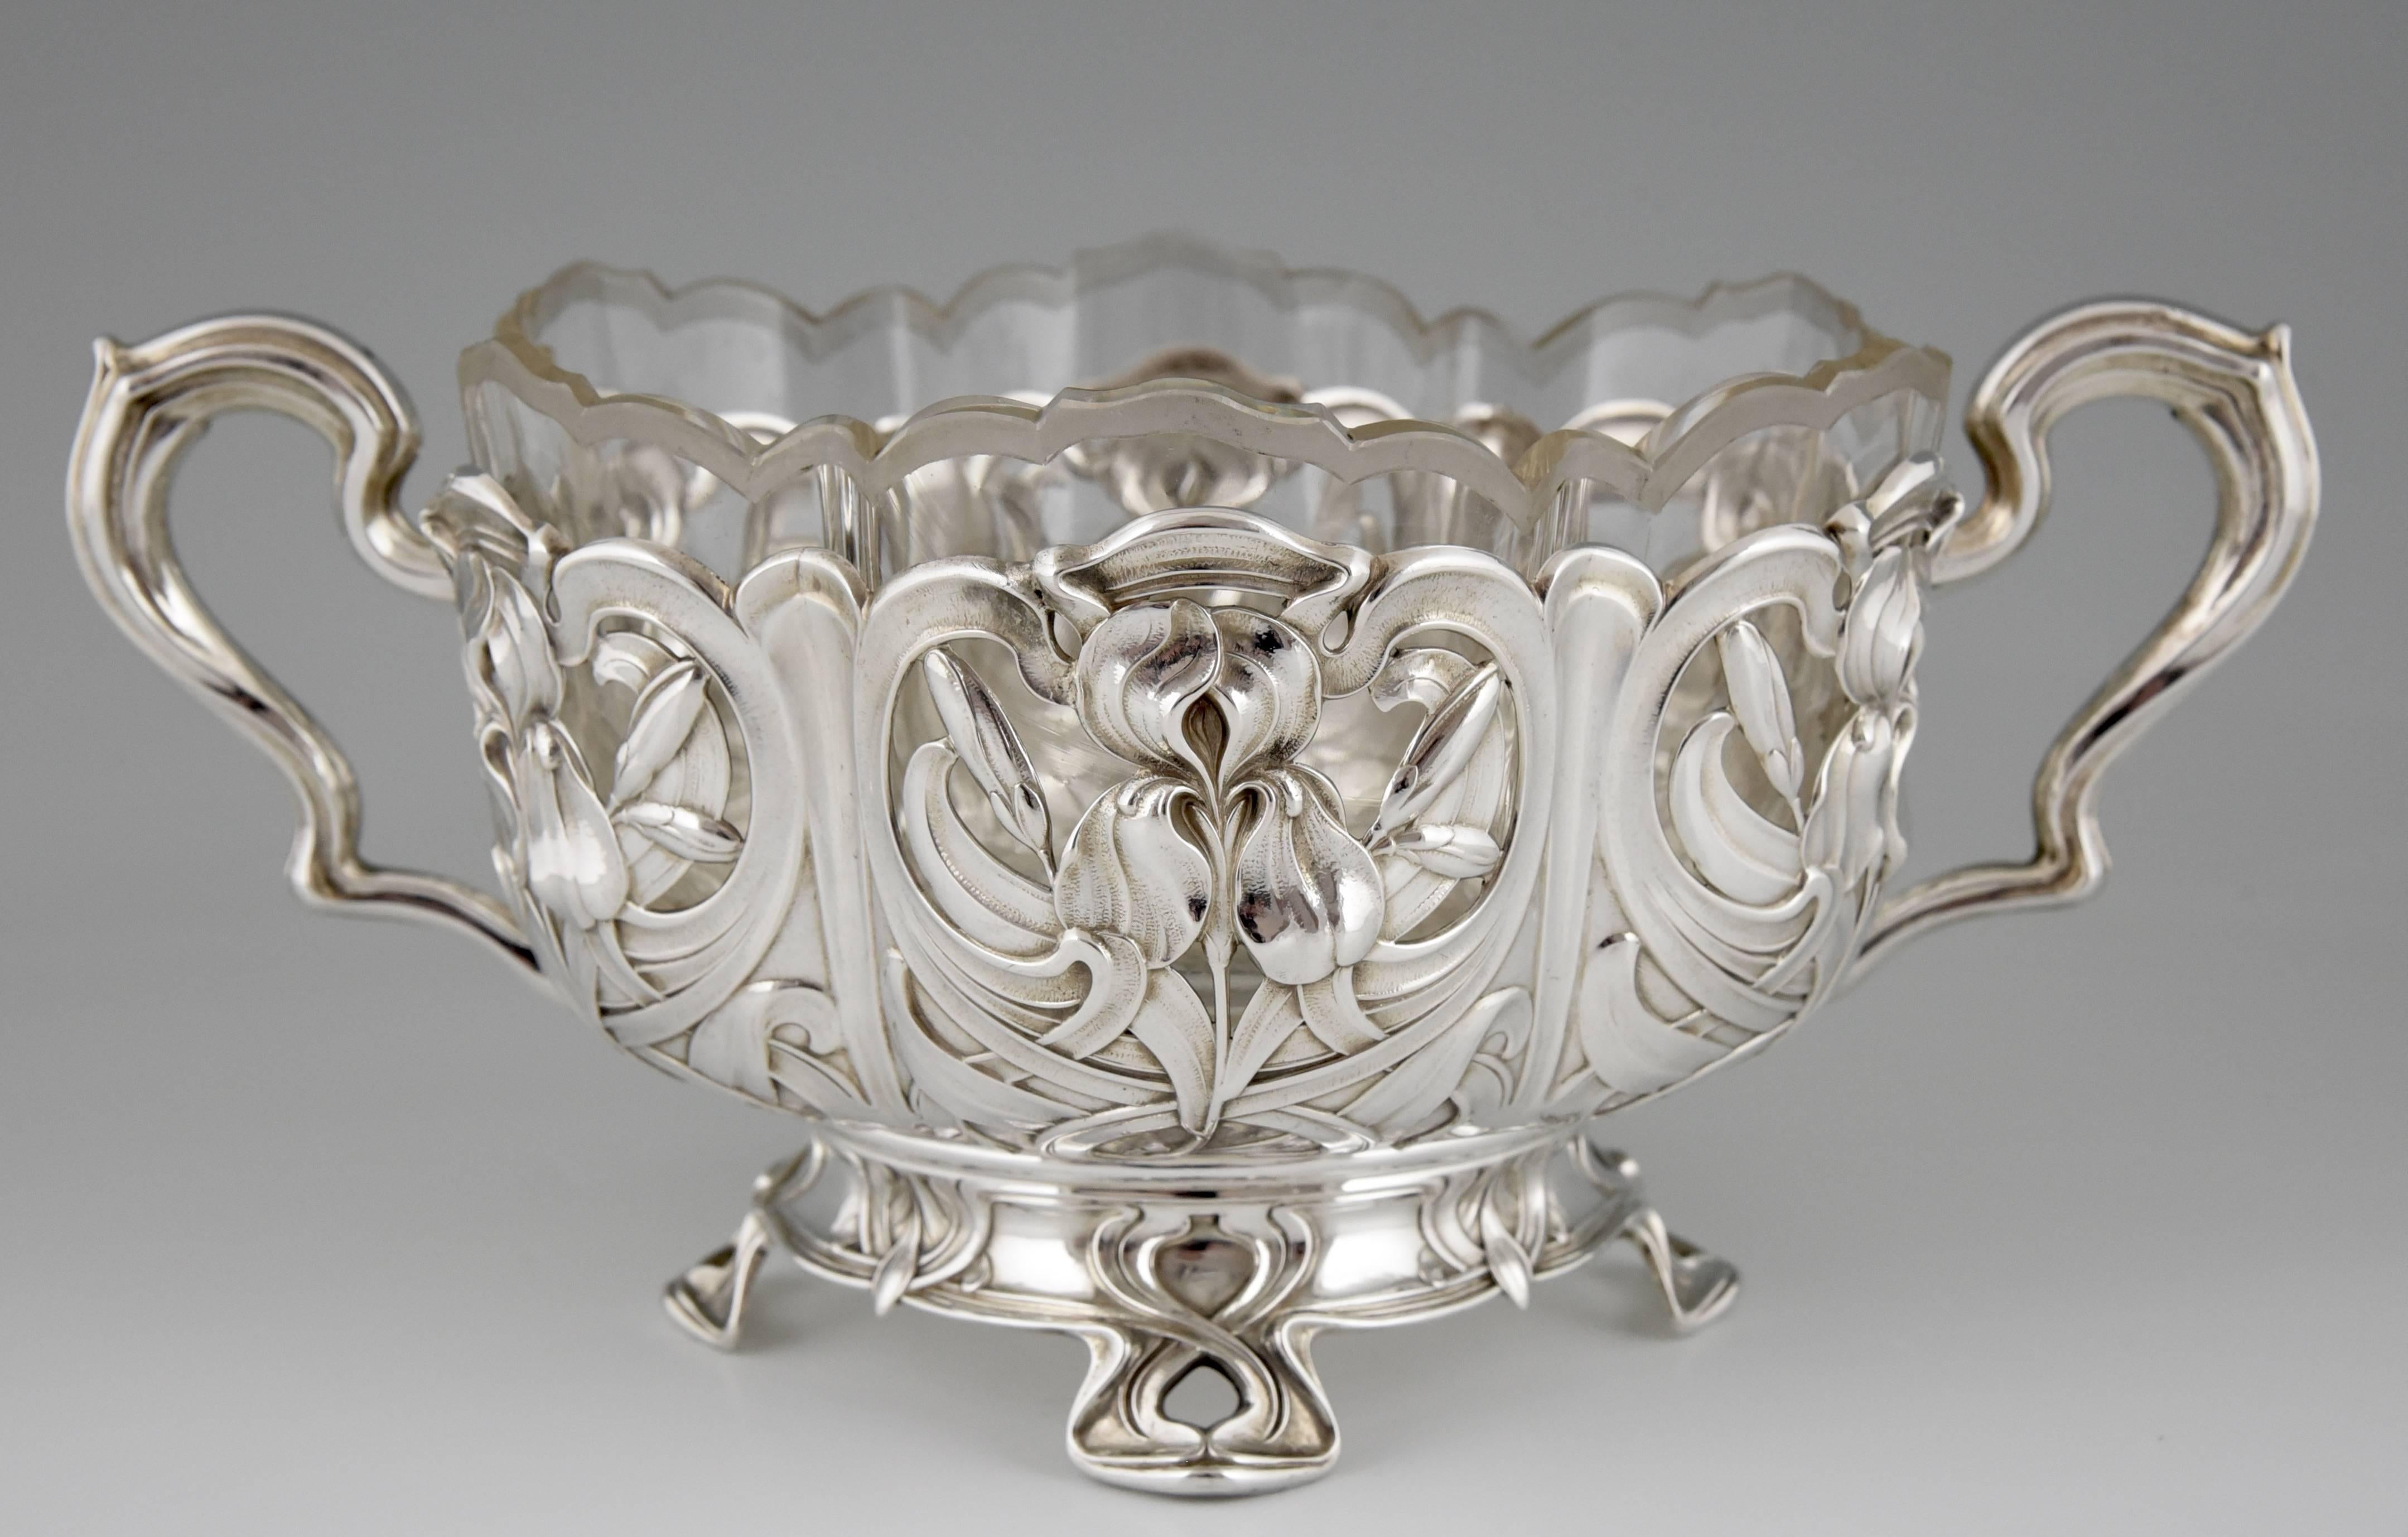 An Art Nouveau silver flower dish with glass liner. Floral design with irises. 
Silver, 800. 
Original glass liner with frosted glass rim.	

Literature:
 “Art nouveau and art deco silver“  Written by Annelies Krekels Aalberse,  Published by